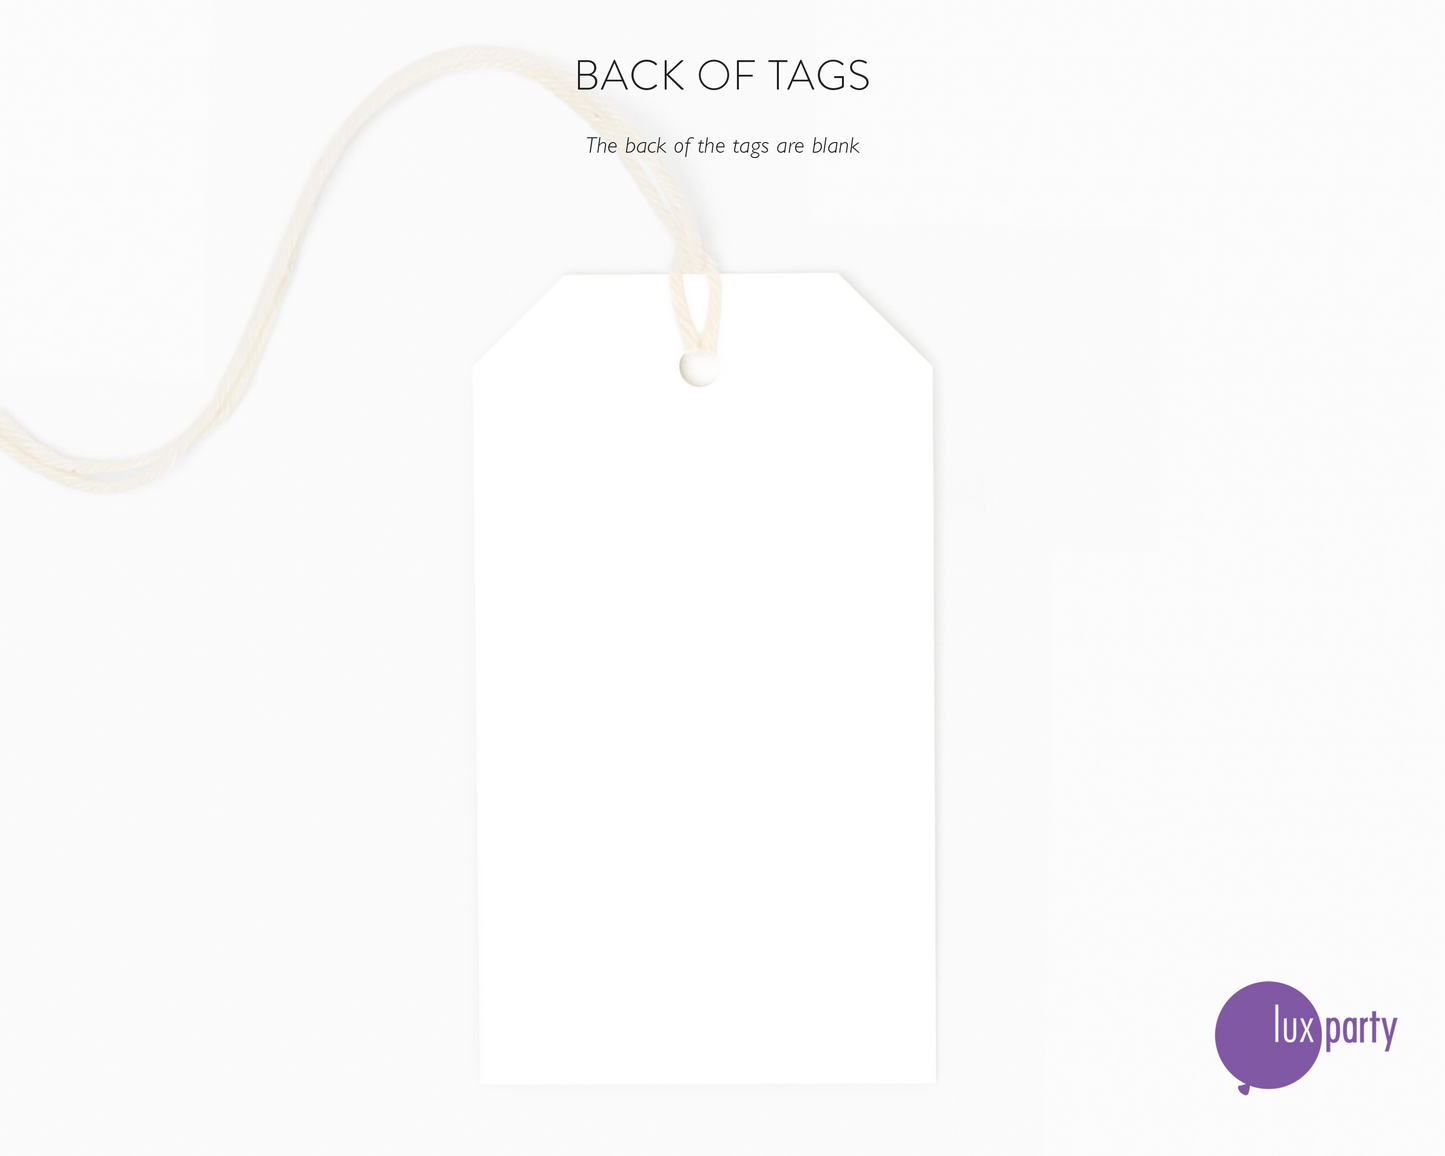 A blank white favor tag, with an off-white cotton string attached, showing that the back of the tag is blank. Lux Party logo.